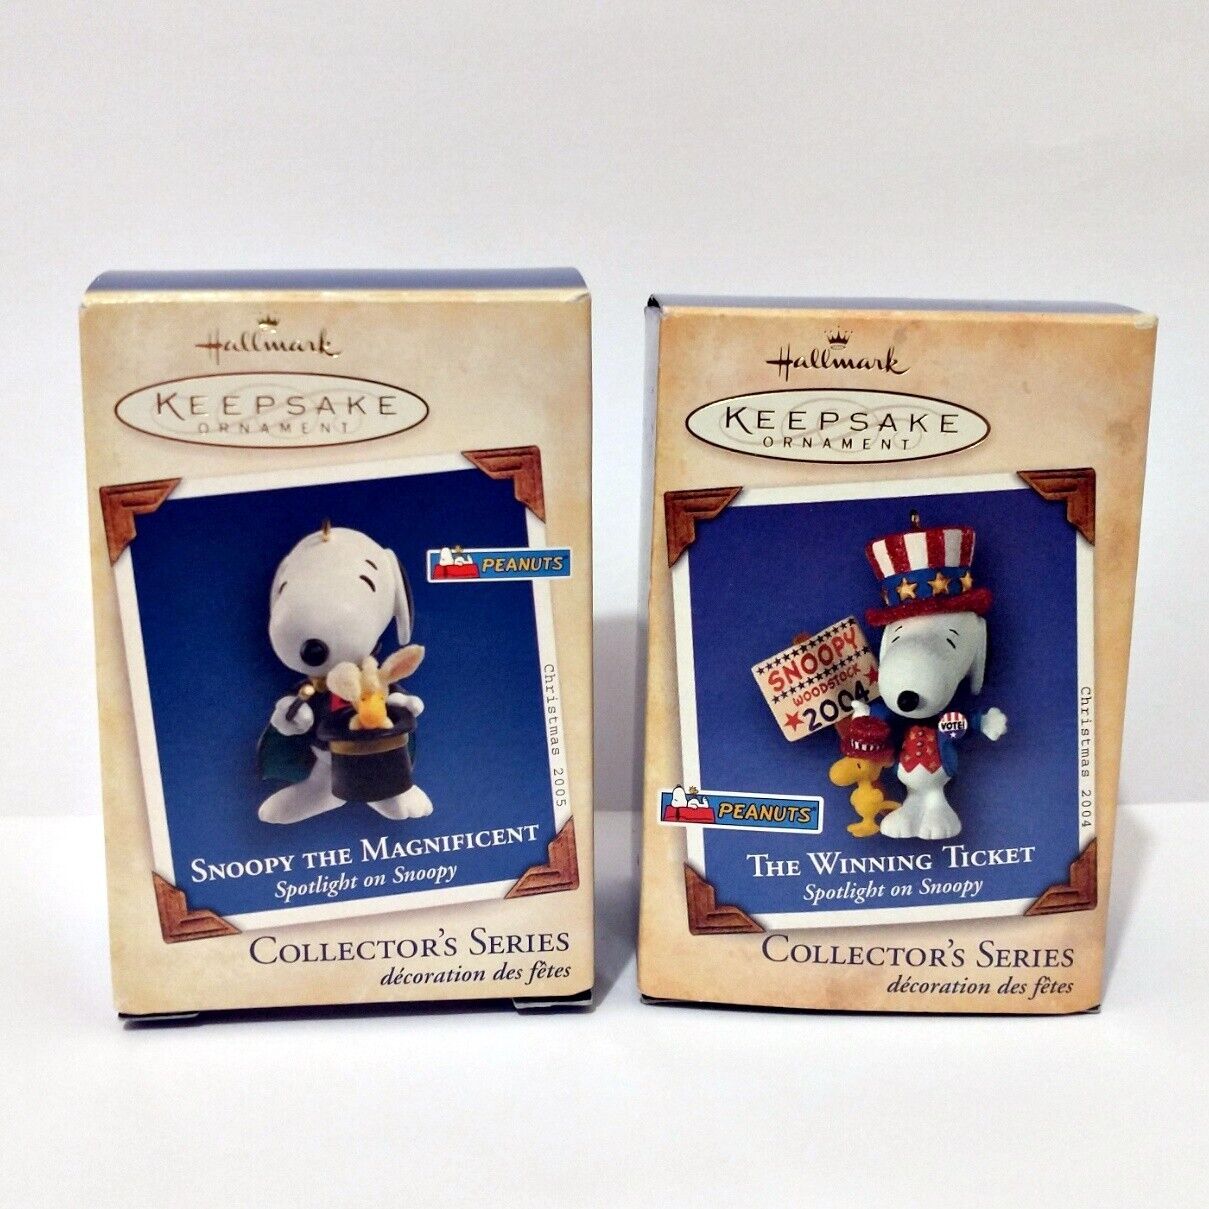 2 SNOOPY HALLMARK ORNAMENTS - Snoopy the Magnificent & The Winning Ticket